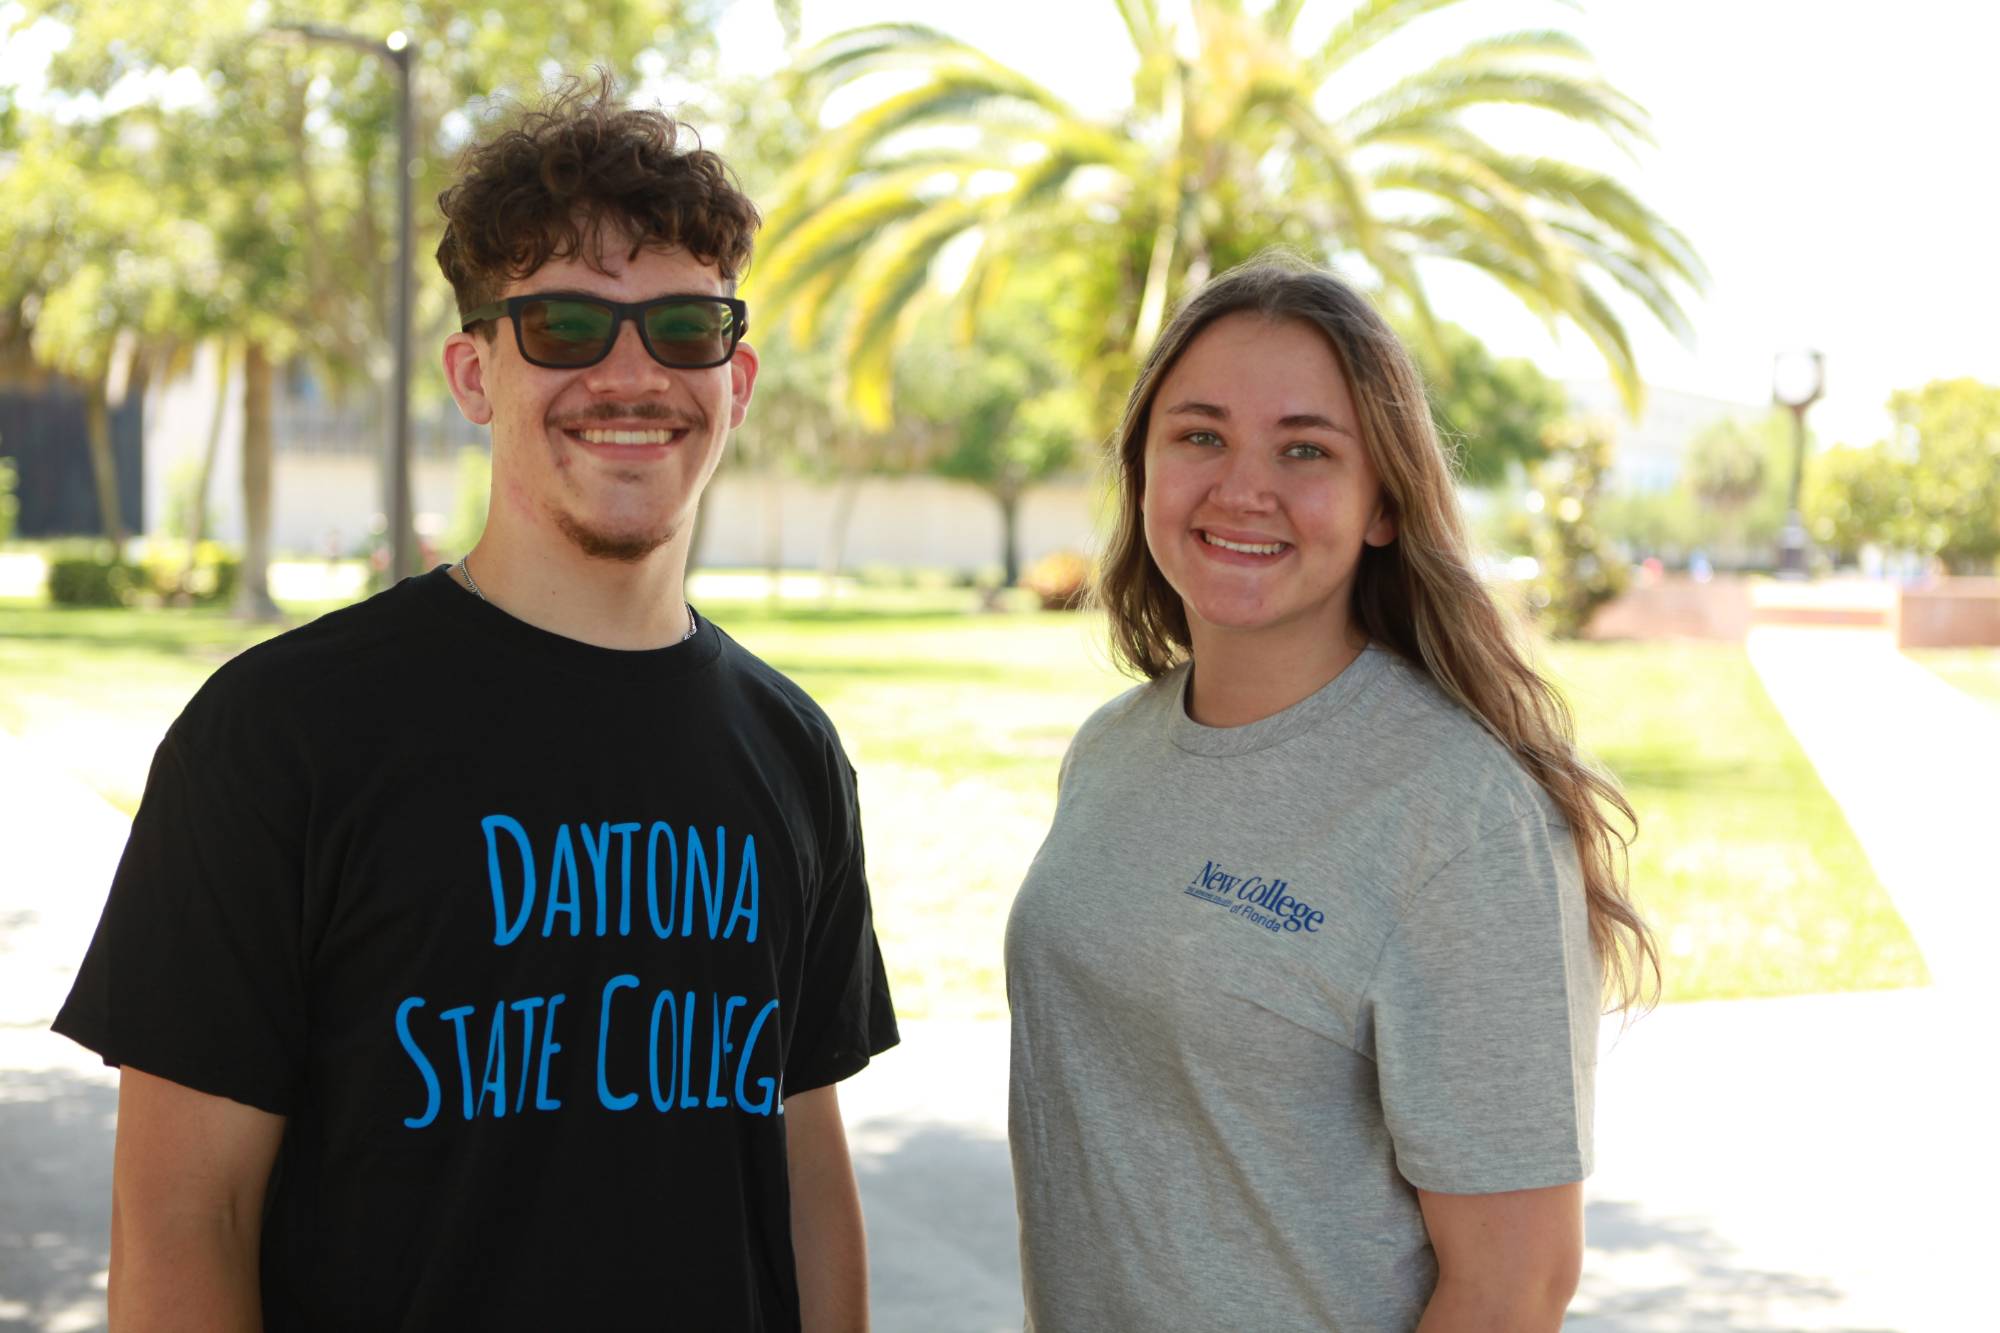 student in Daytona State College tshirt and another student in New College tshirt